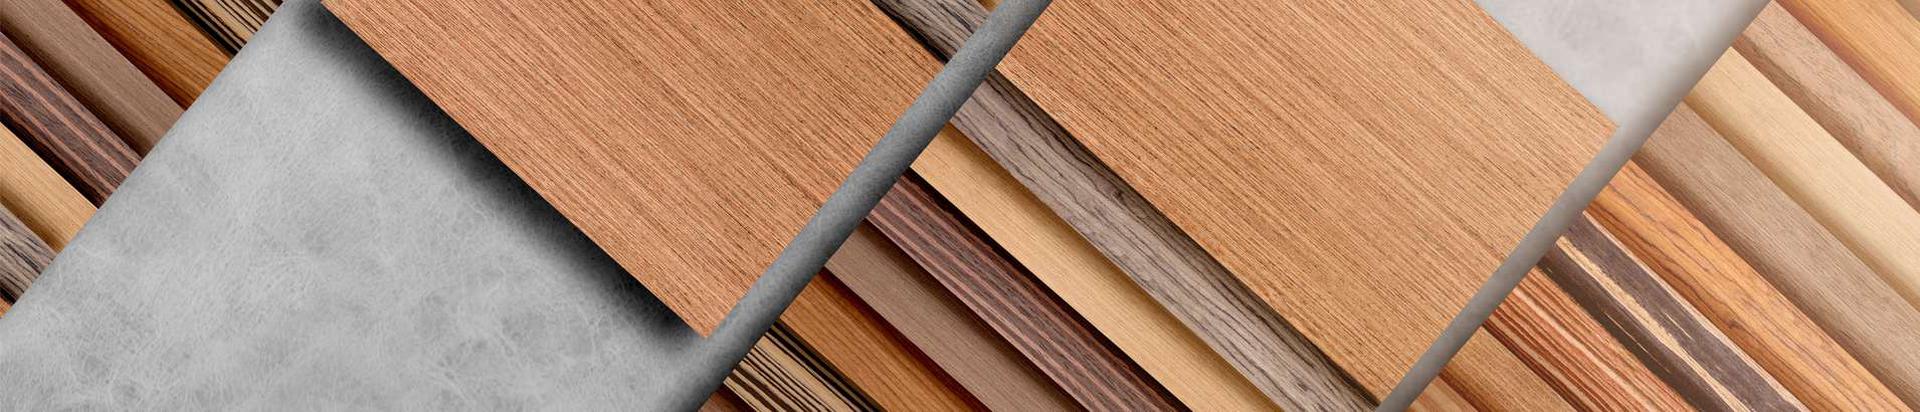 Our product range includes veneer, precious wood, board materials and design products.